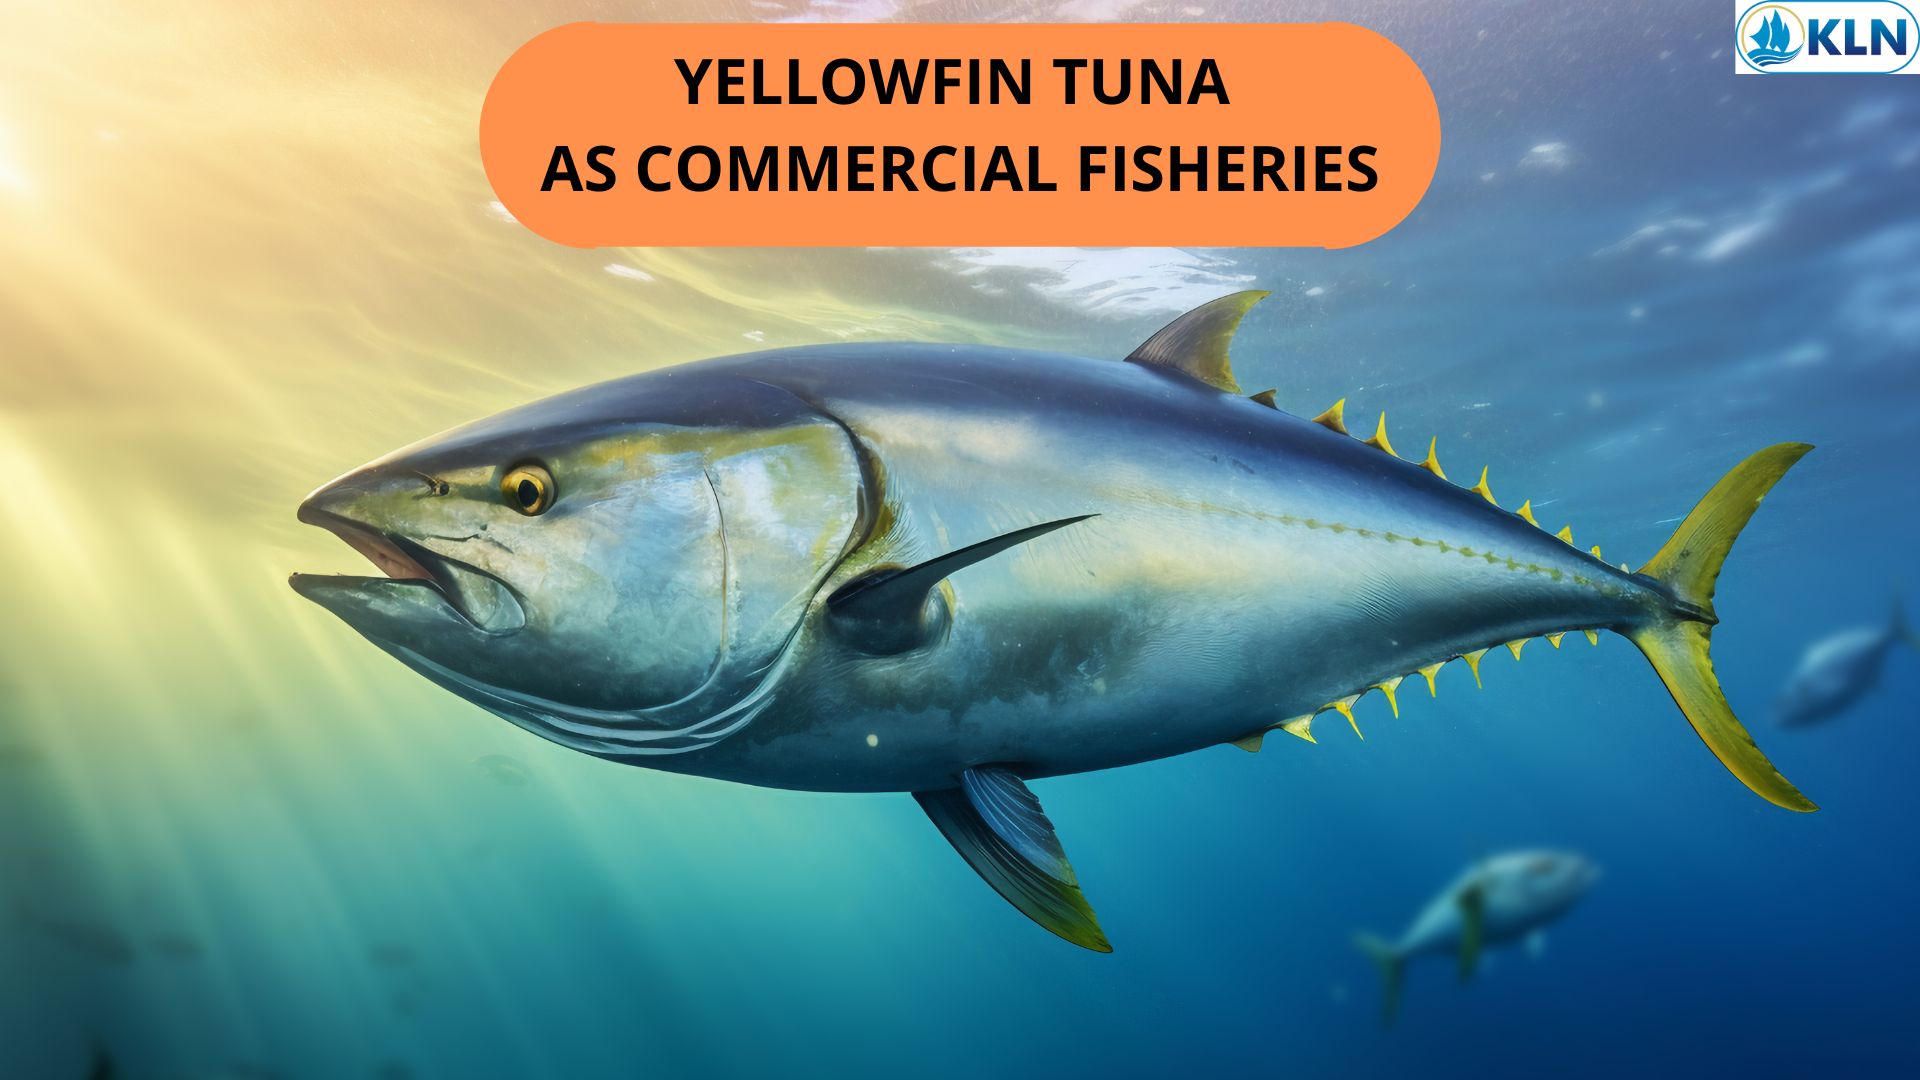 YELLOWFIN TUNA AS COMMERCIAL FISHERIES